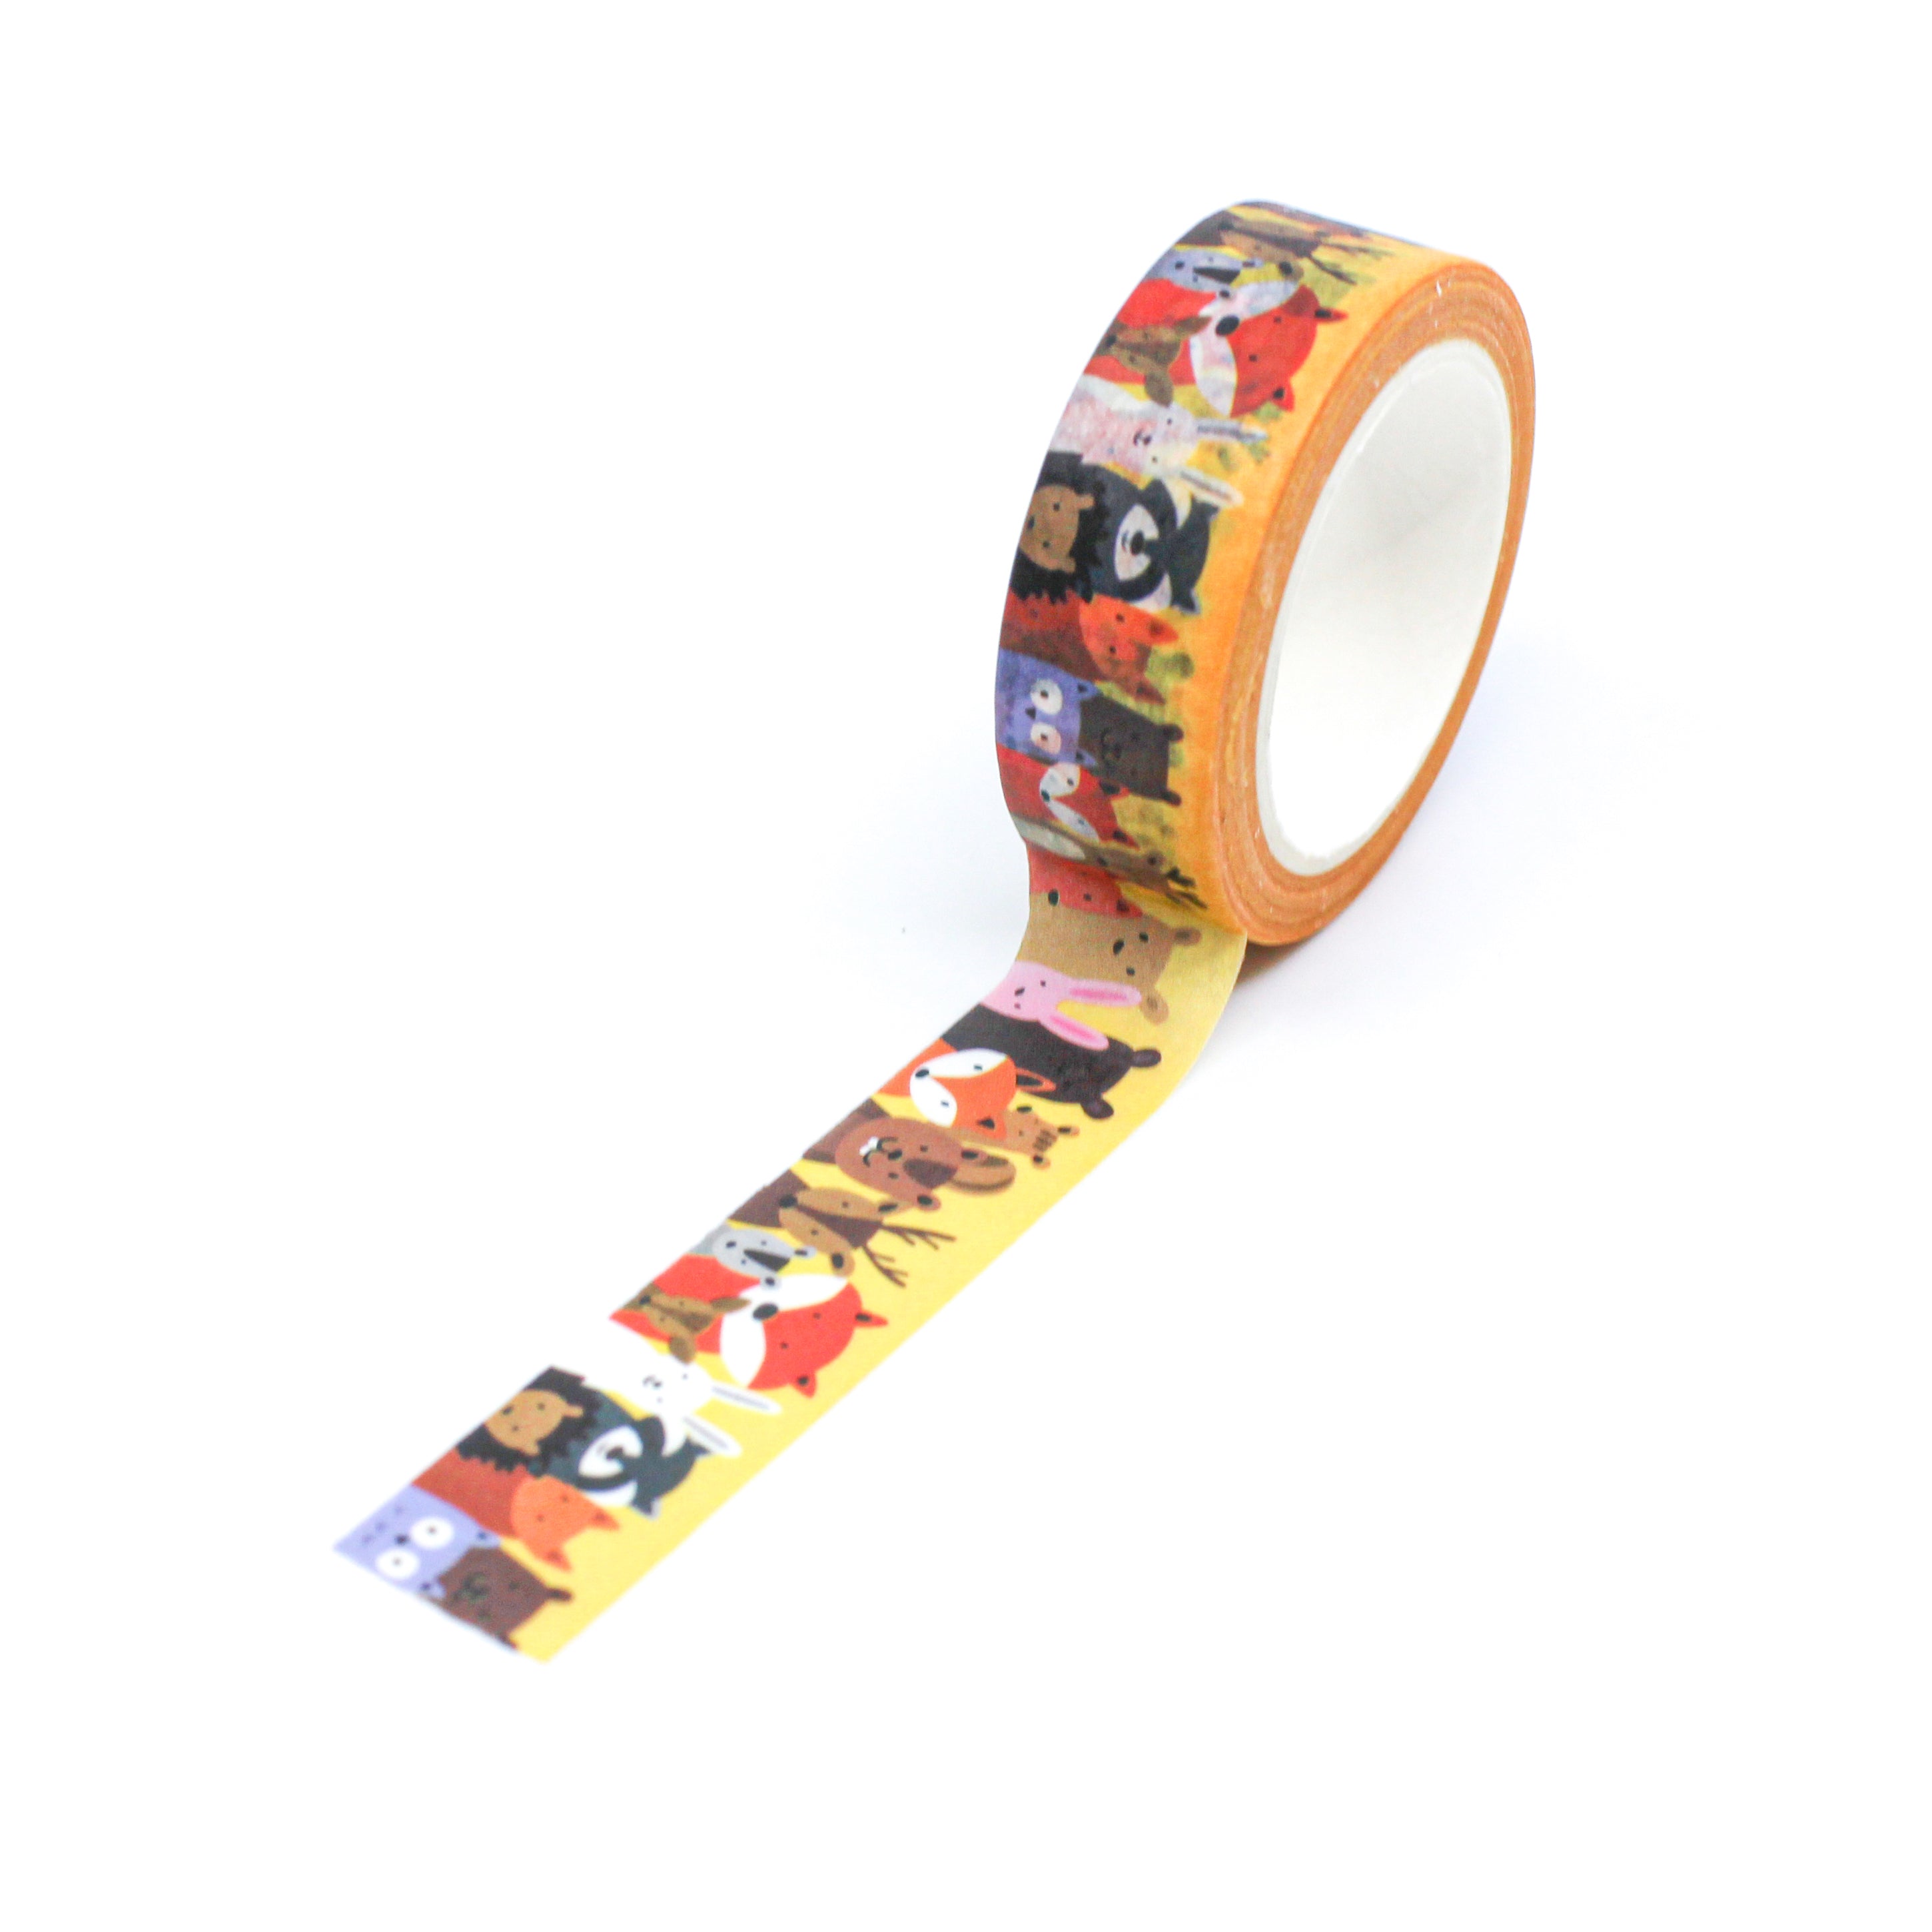 This is a repeat full pattern view of yellow foil woodland animal creatures pattern washi tape from BBB Supplies Craft Shop